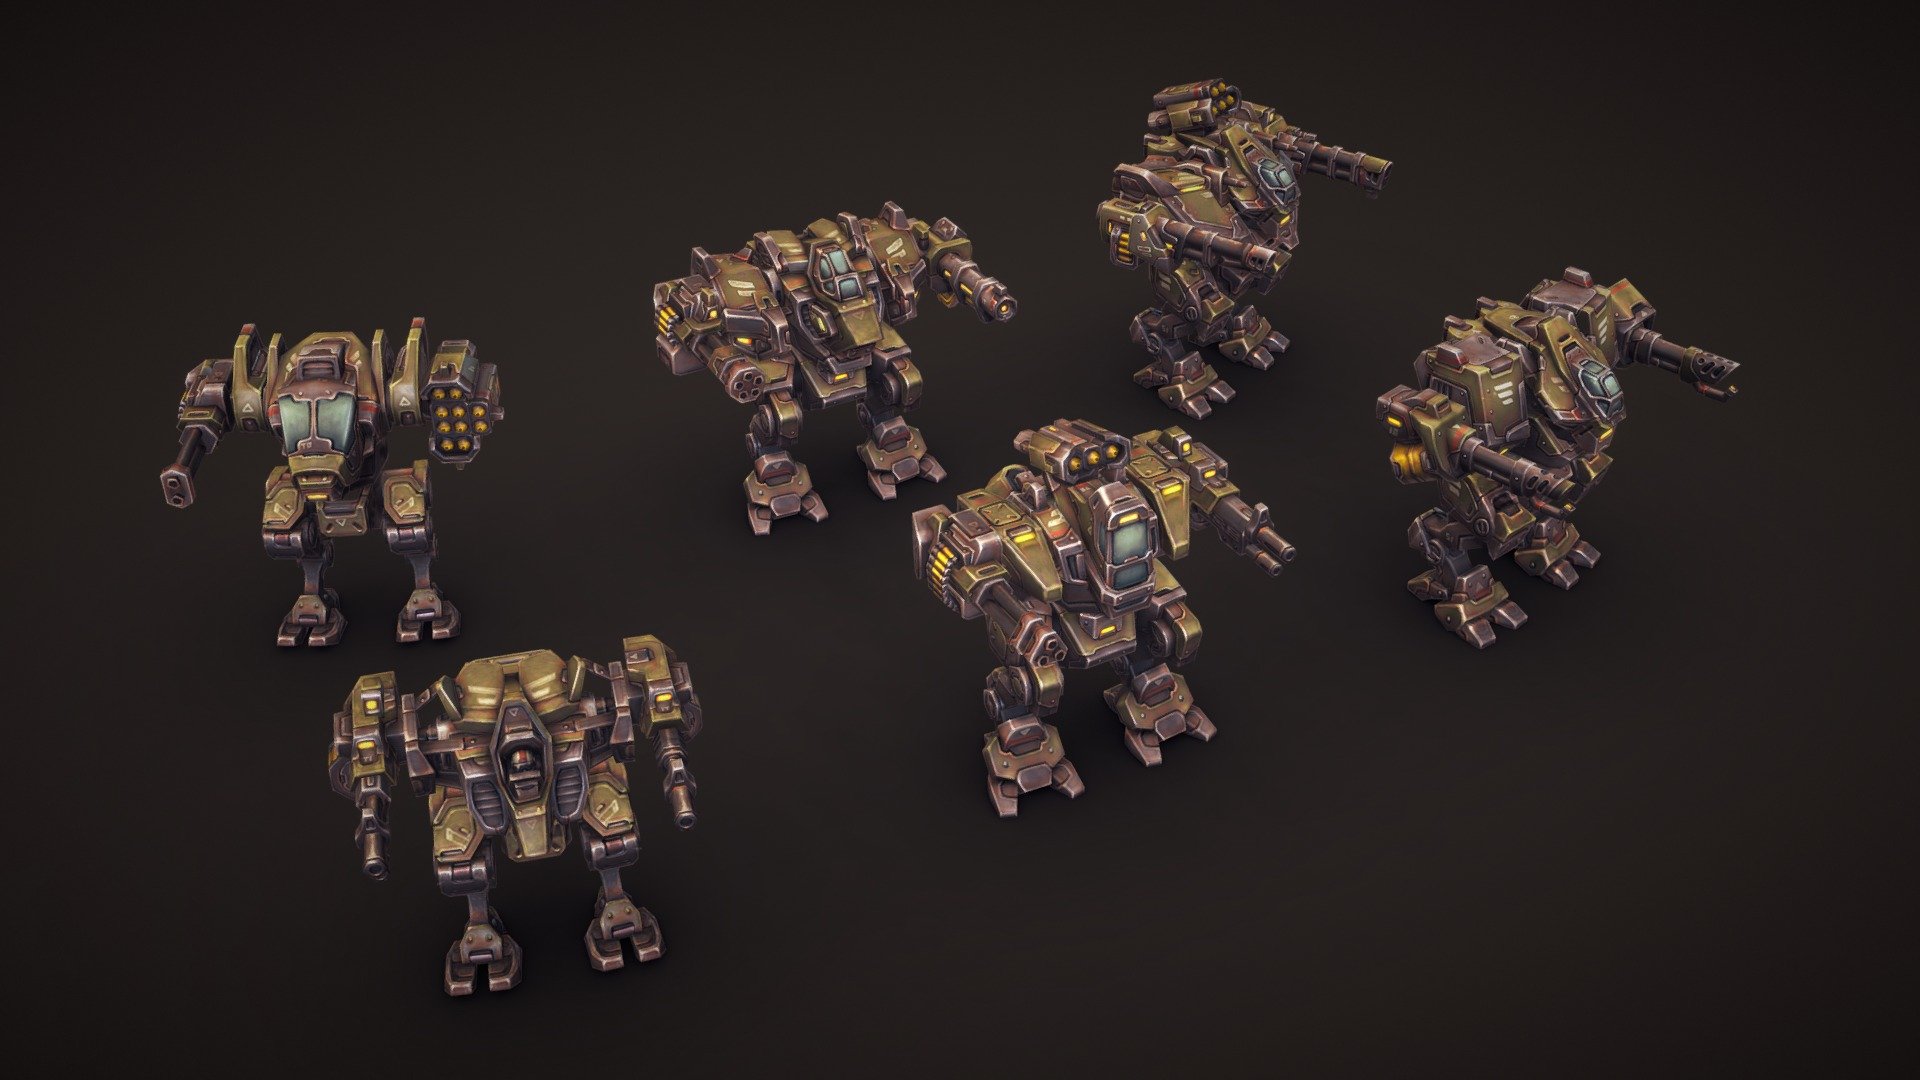 Other previews of this package:
Assault Mech, 
Inquisitor

The package contains over 60 different modules, that will allow you to create numerous combinations of animated and ready to fight mechs and vehicles. The poly count of units varies from 1.3k to 2.1k tris. The textures vary from hand painted 4k diffuse atlas, which looks good even unlit, to the set of PBR maps. 

Parts: 


3 types of Legs 
9 Shoulders 
5 Cockpits 
4 Backapcks 
Bonus: Flying units (5 levels) 

Weapons: 


Machneguns (5 levels) 
Miniguns (5 levels) 
Cannons (5 levels) 
Lasers (5 levels) 
Flamethrowers (5 levels) 
Rockets (10 levels) 
Shoulder mounted Rockets (4 levels) 
Rocket missile

Animations: 


Idle 
Walk 
Turn while walking 
Run 
Turn while running 
Jump 
Death (fall) 
Turn on place
 - Mech Constructor: Light and Medium Robots - 3D model by Slava Z. (@slava) 3d model